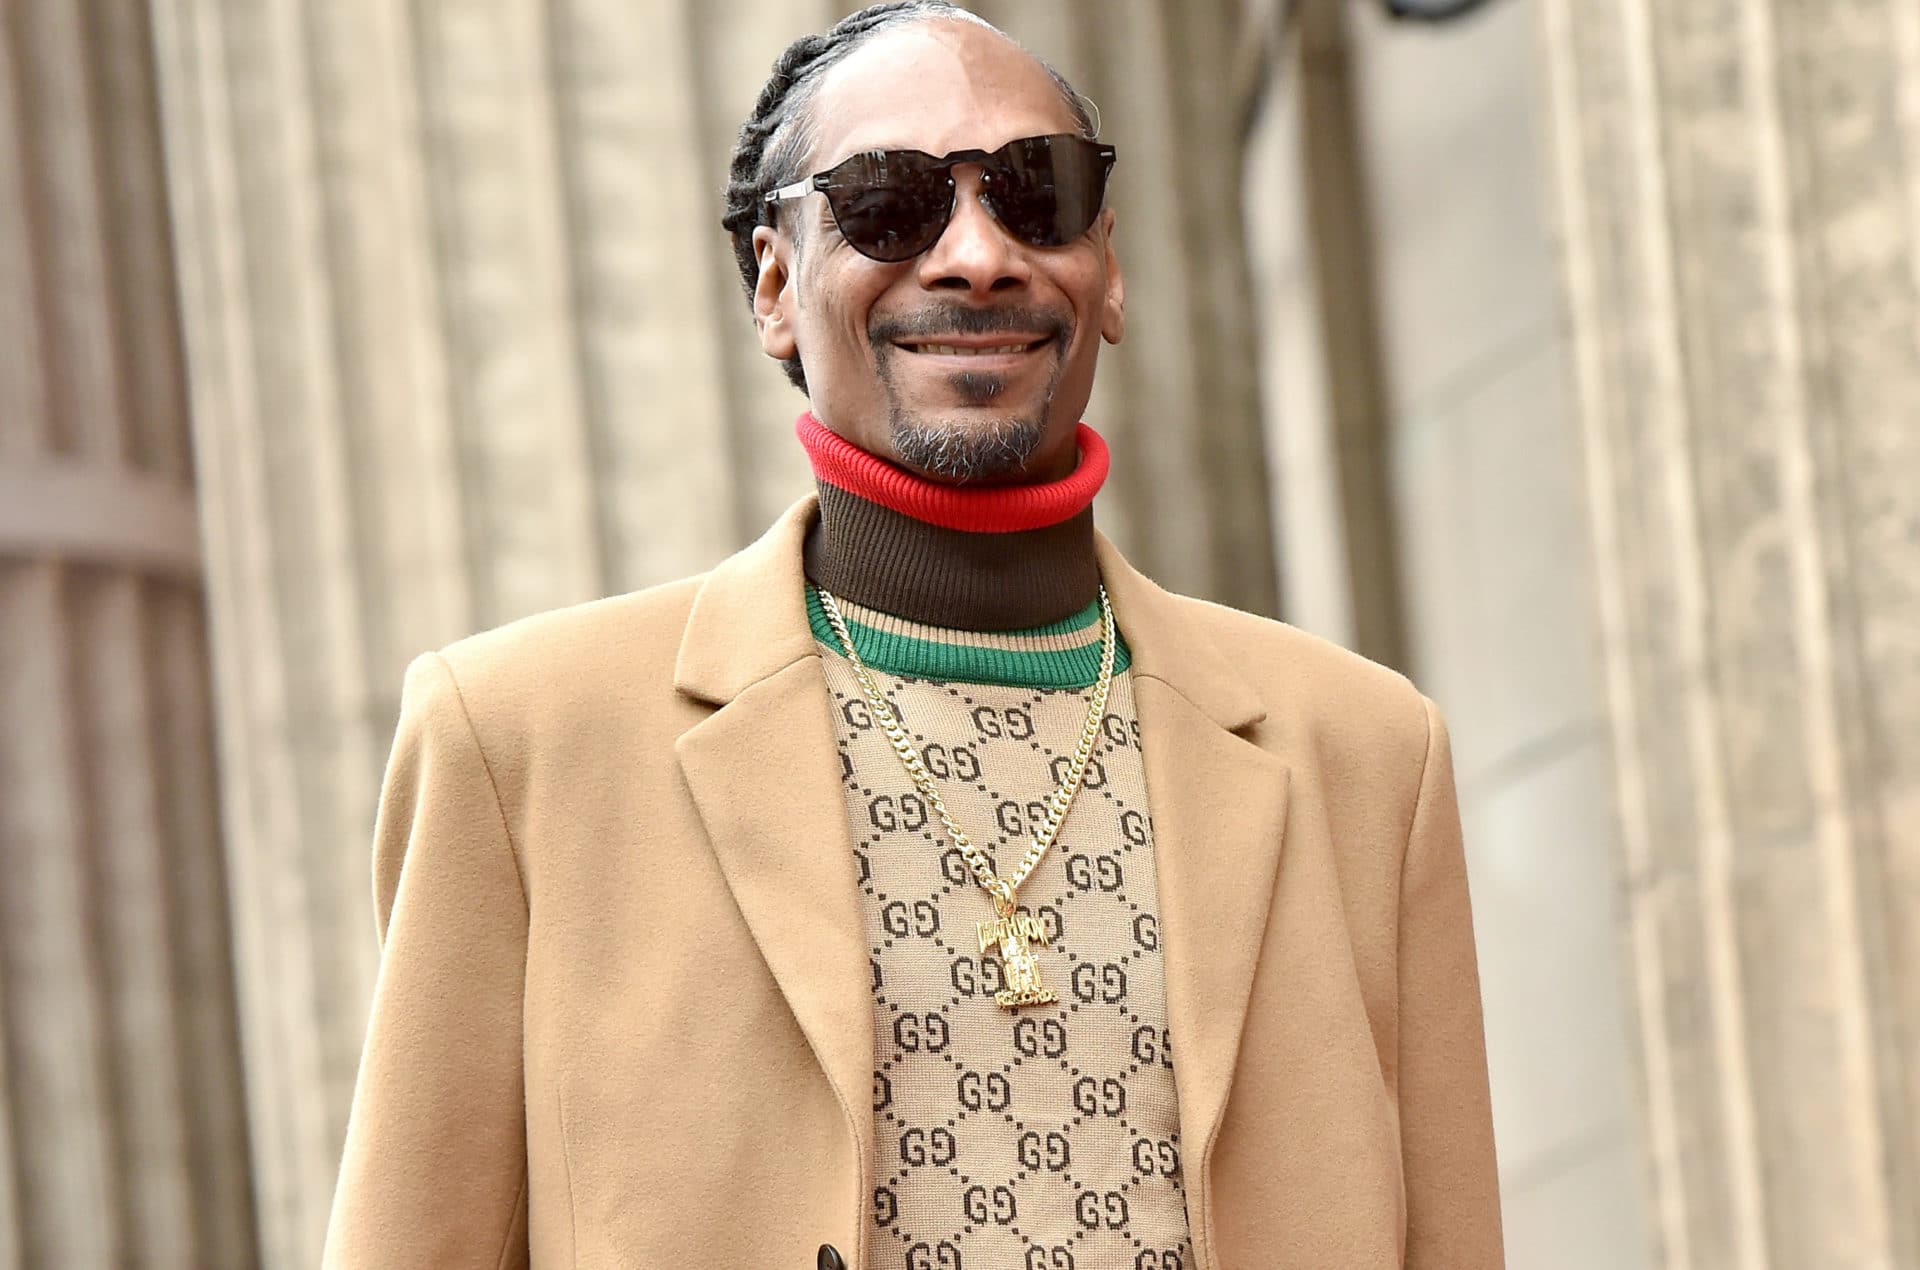 Snoop Dogg Thanks Himself While Receiving His Star On The Walk Of Fame